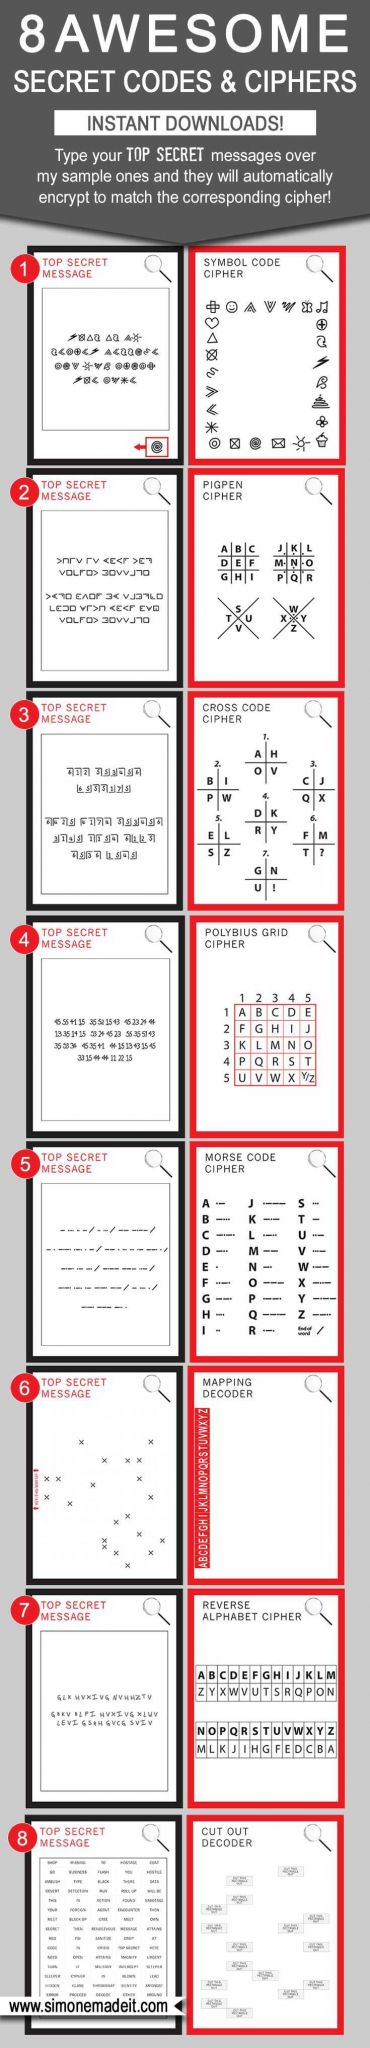 Secret Of Photo 51 Worksheet Answers as Well as 80 Best Bug Party Birthday Ideas Images On Pinterest